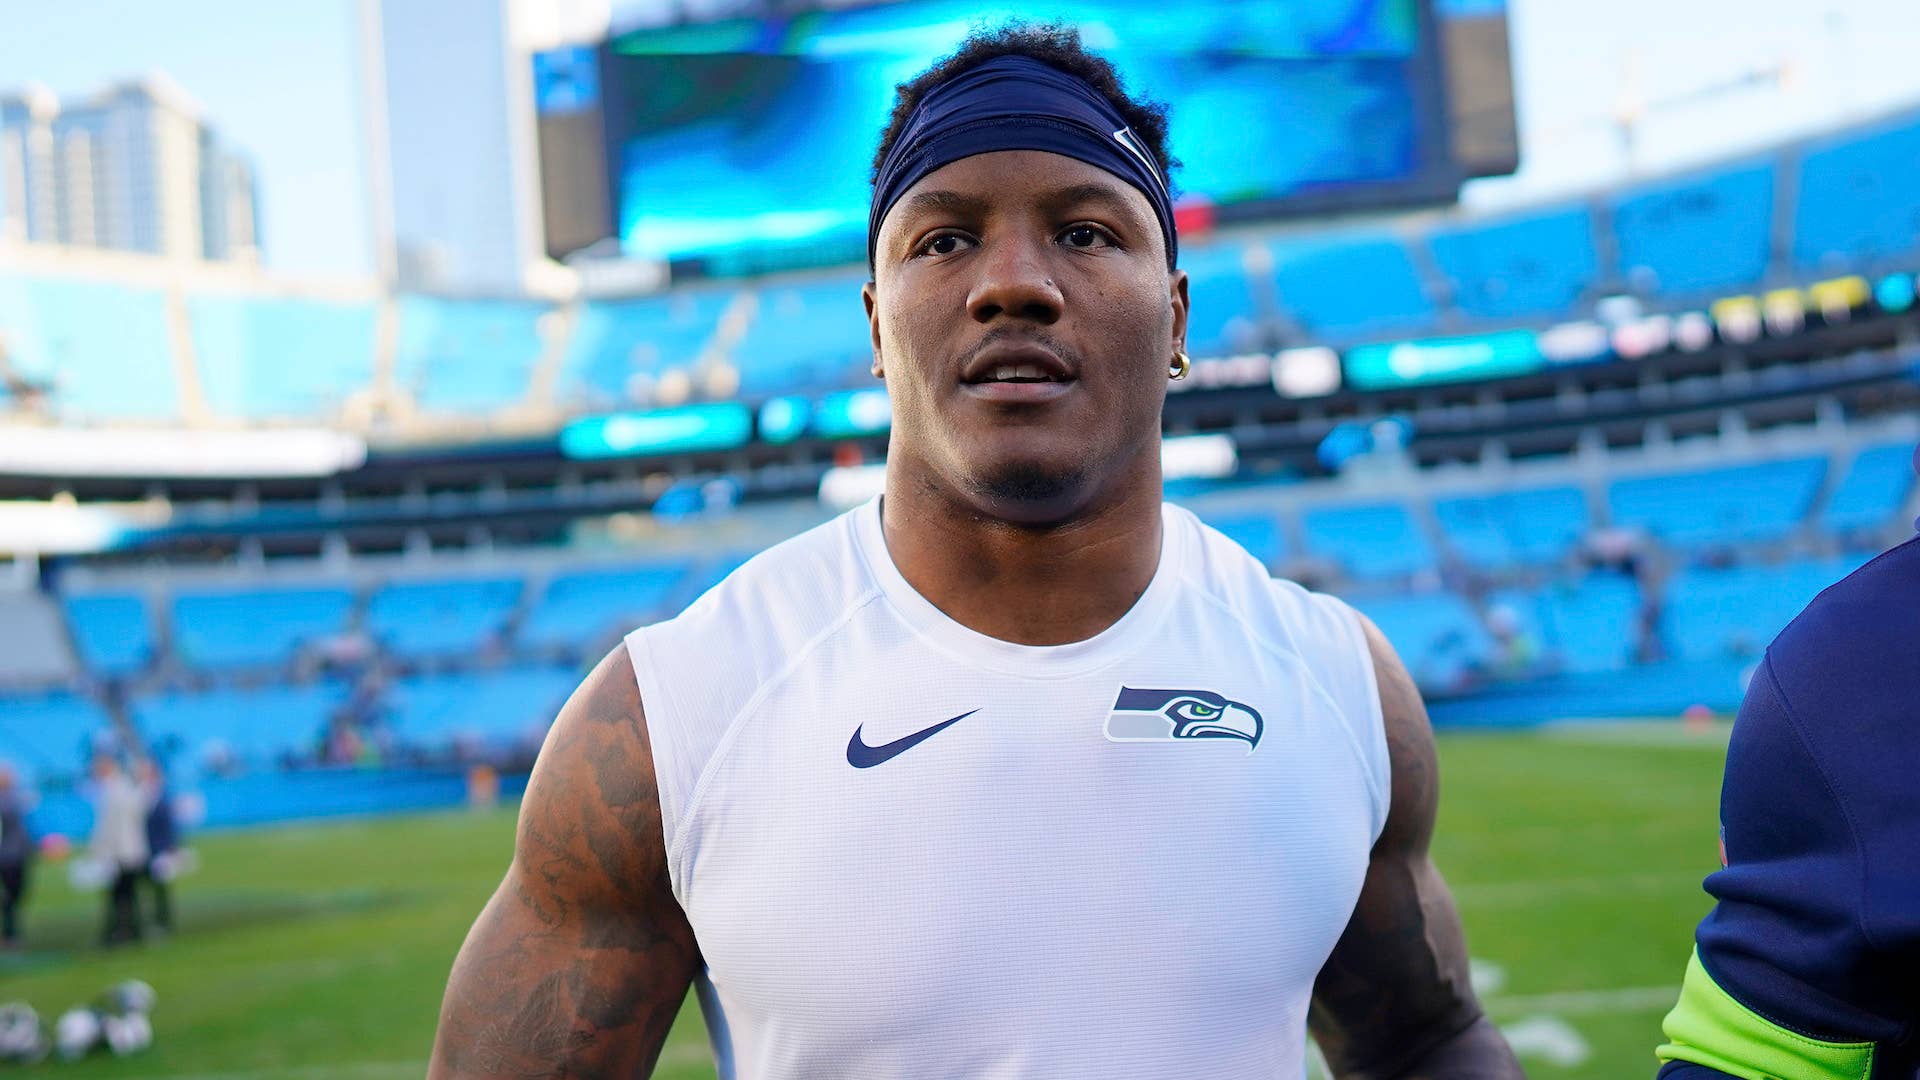 Chris Carson #32 of the Seattle Seahawks after their game against the Carolina Panthers